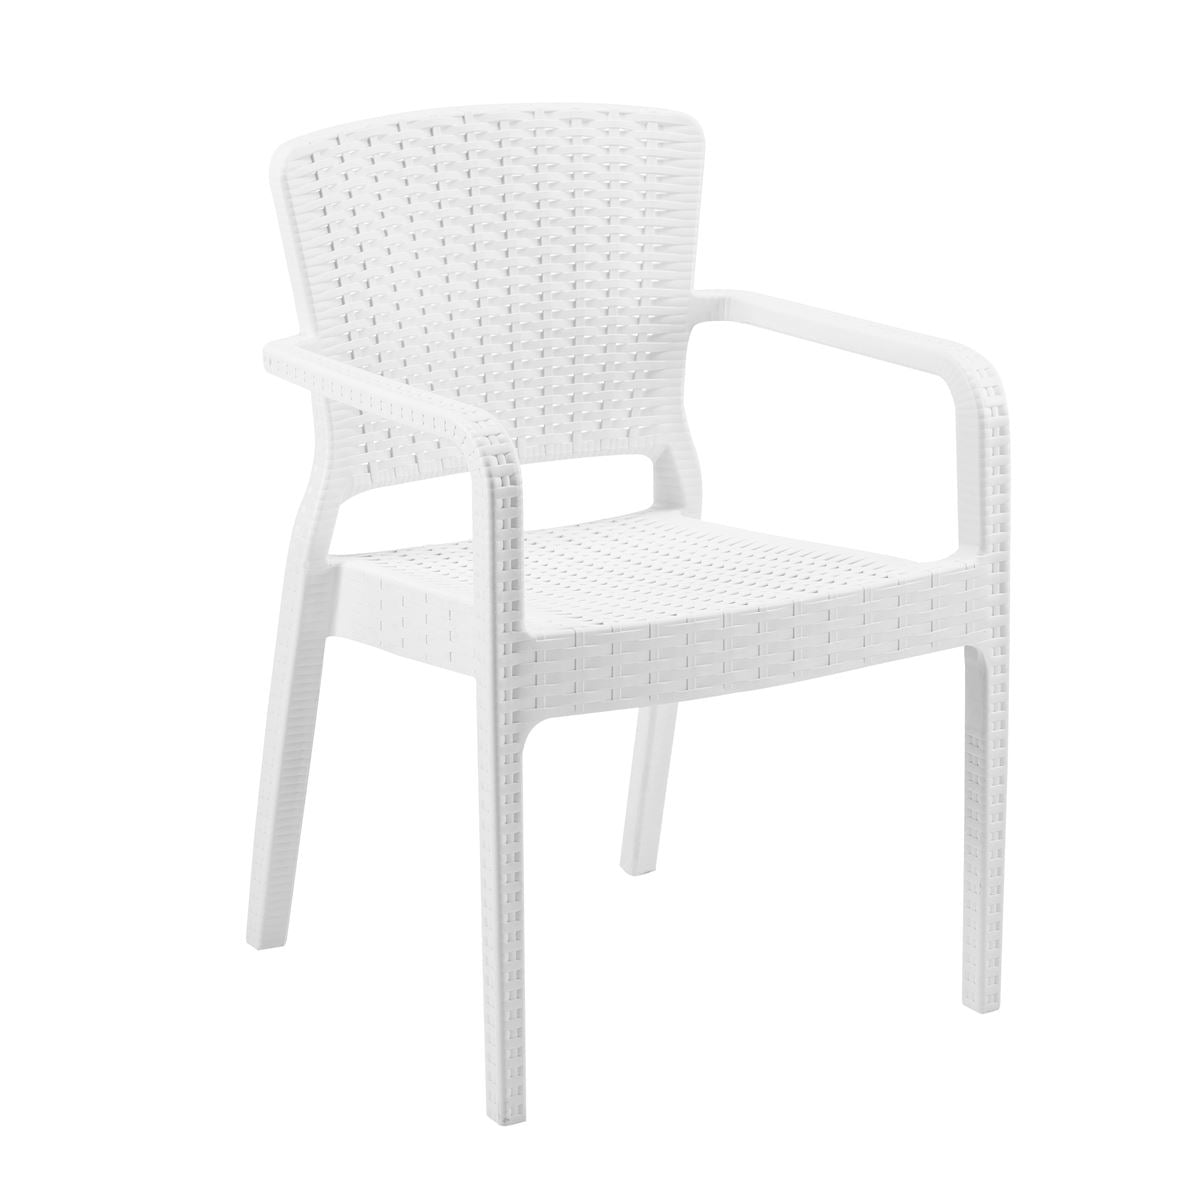 Dellonda Armchair Durable, Weather Resistant PP Body, Stackable x 6 - White